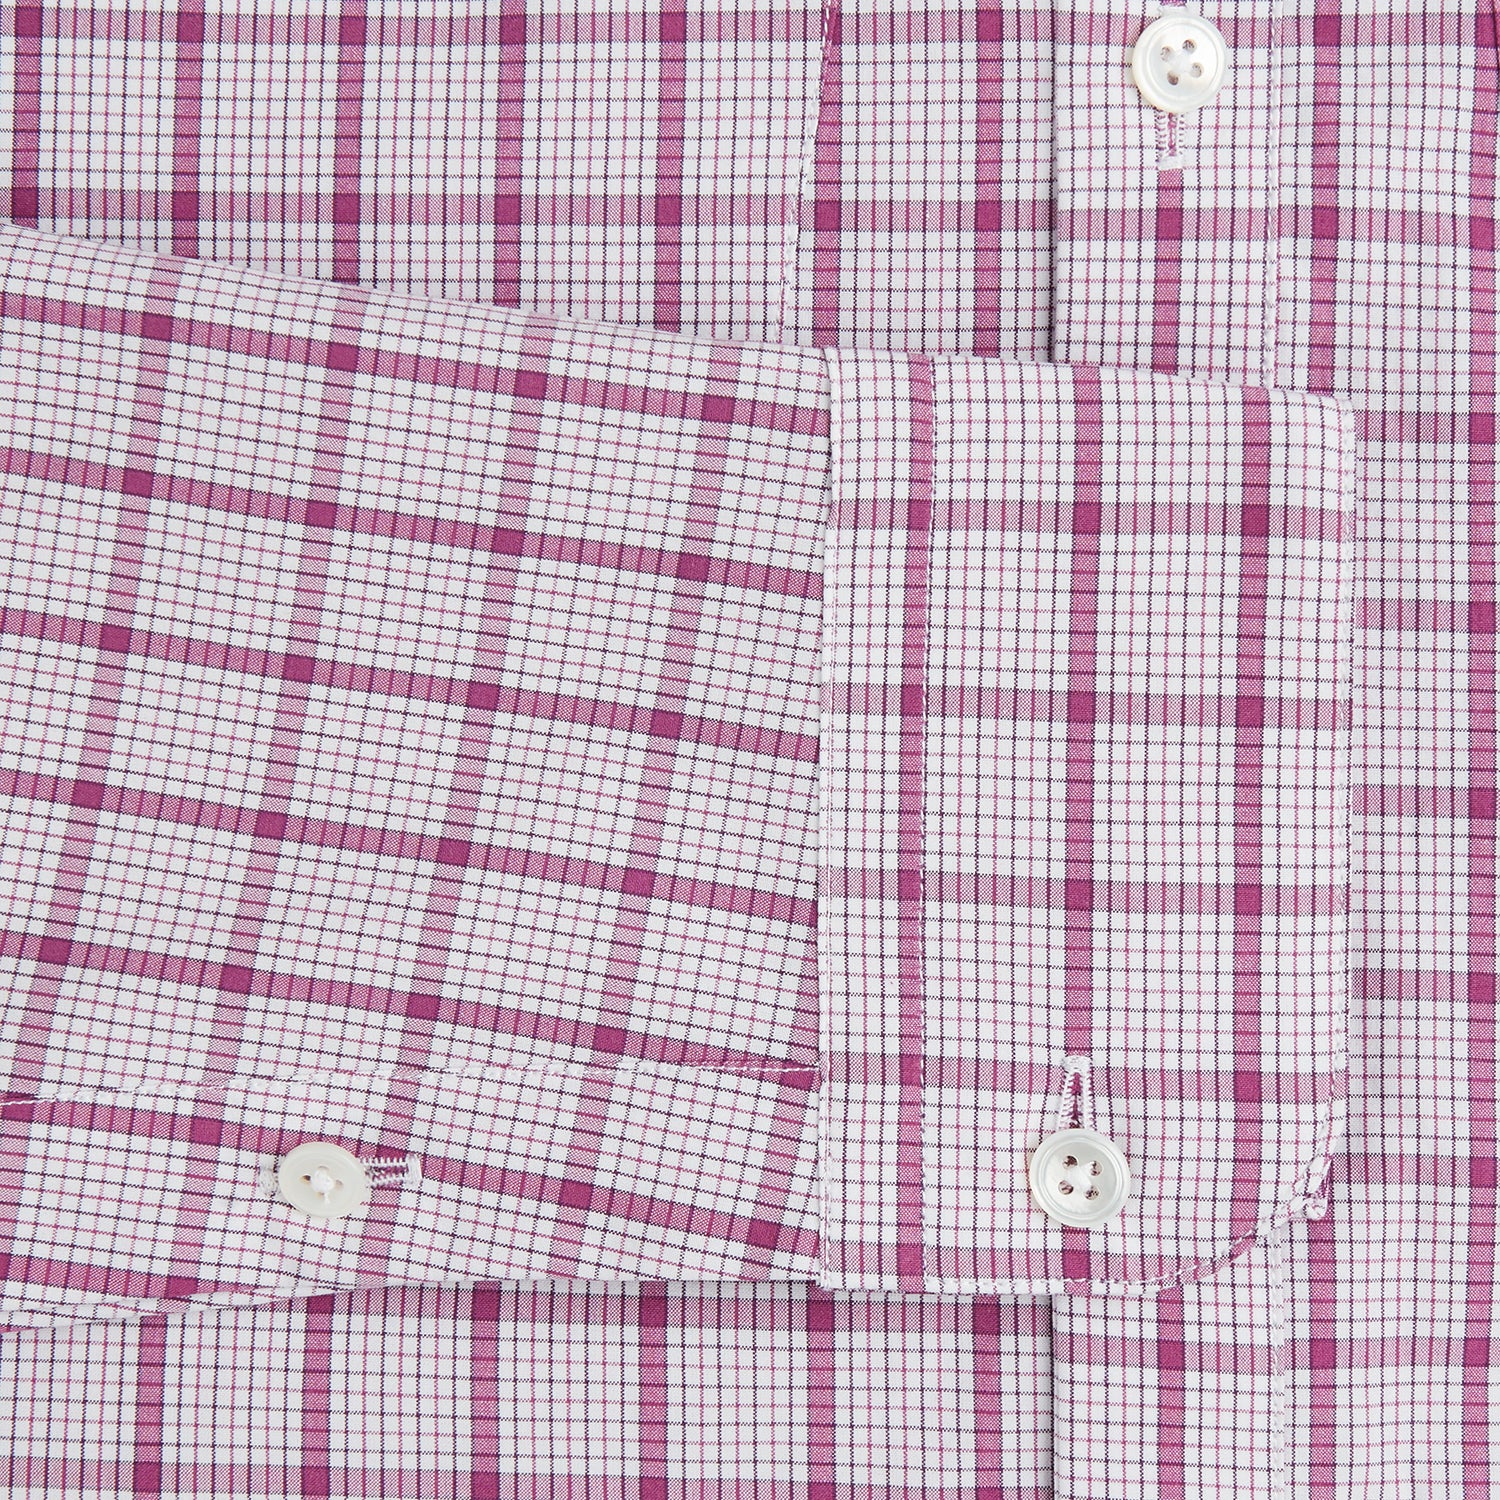 Purple Graph Overlay Check Piccadilly Shirt